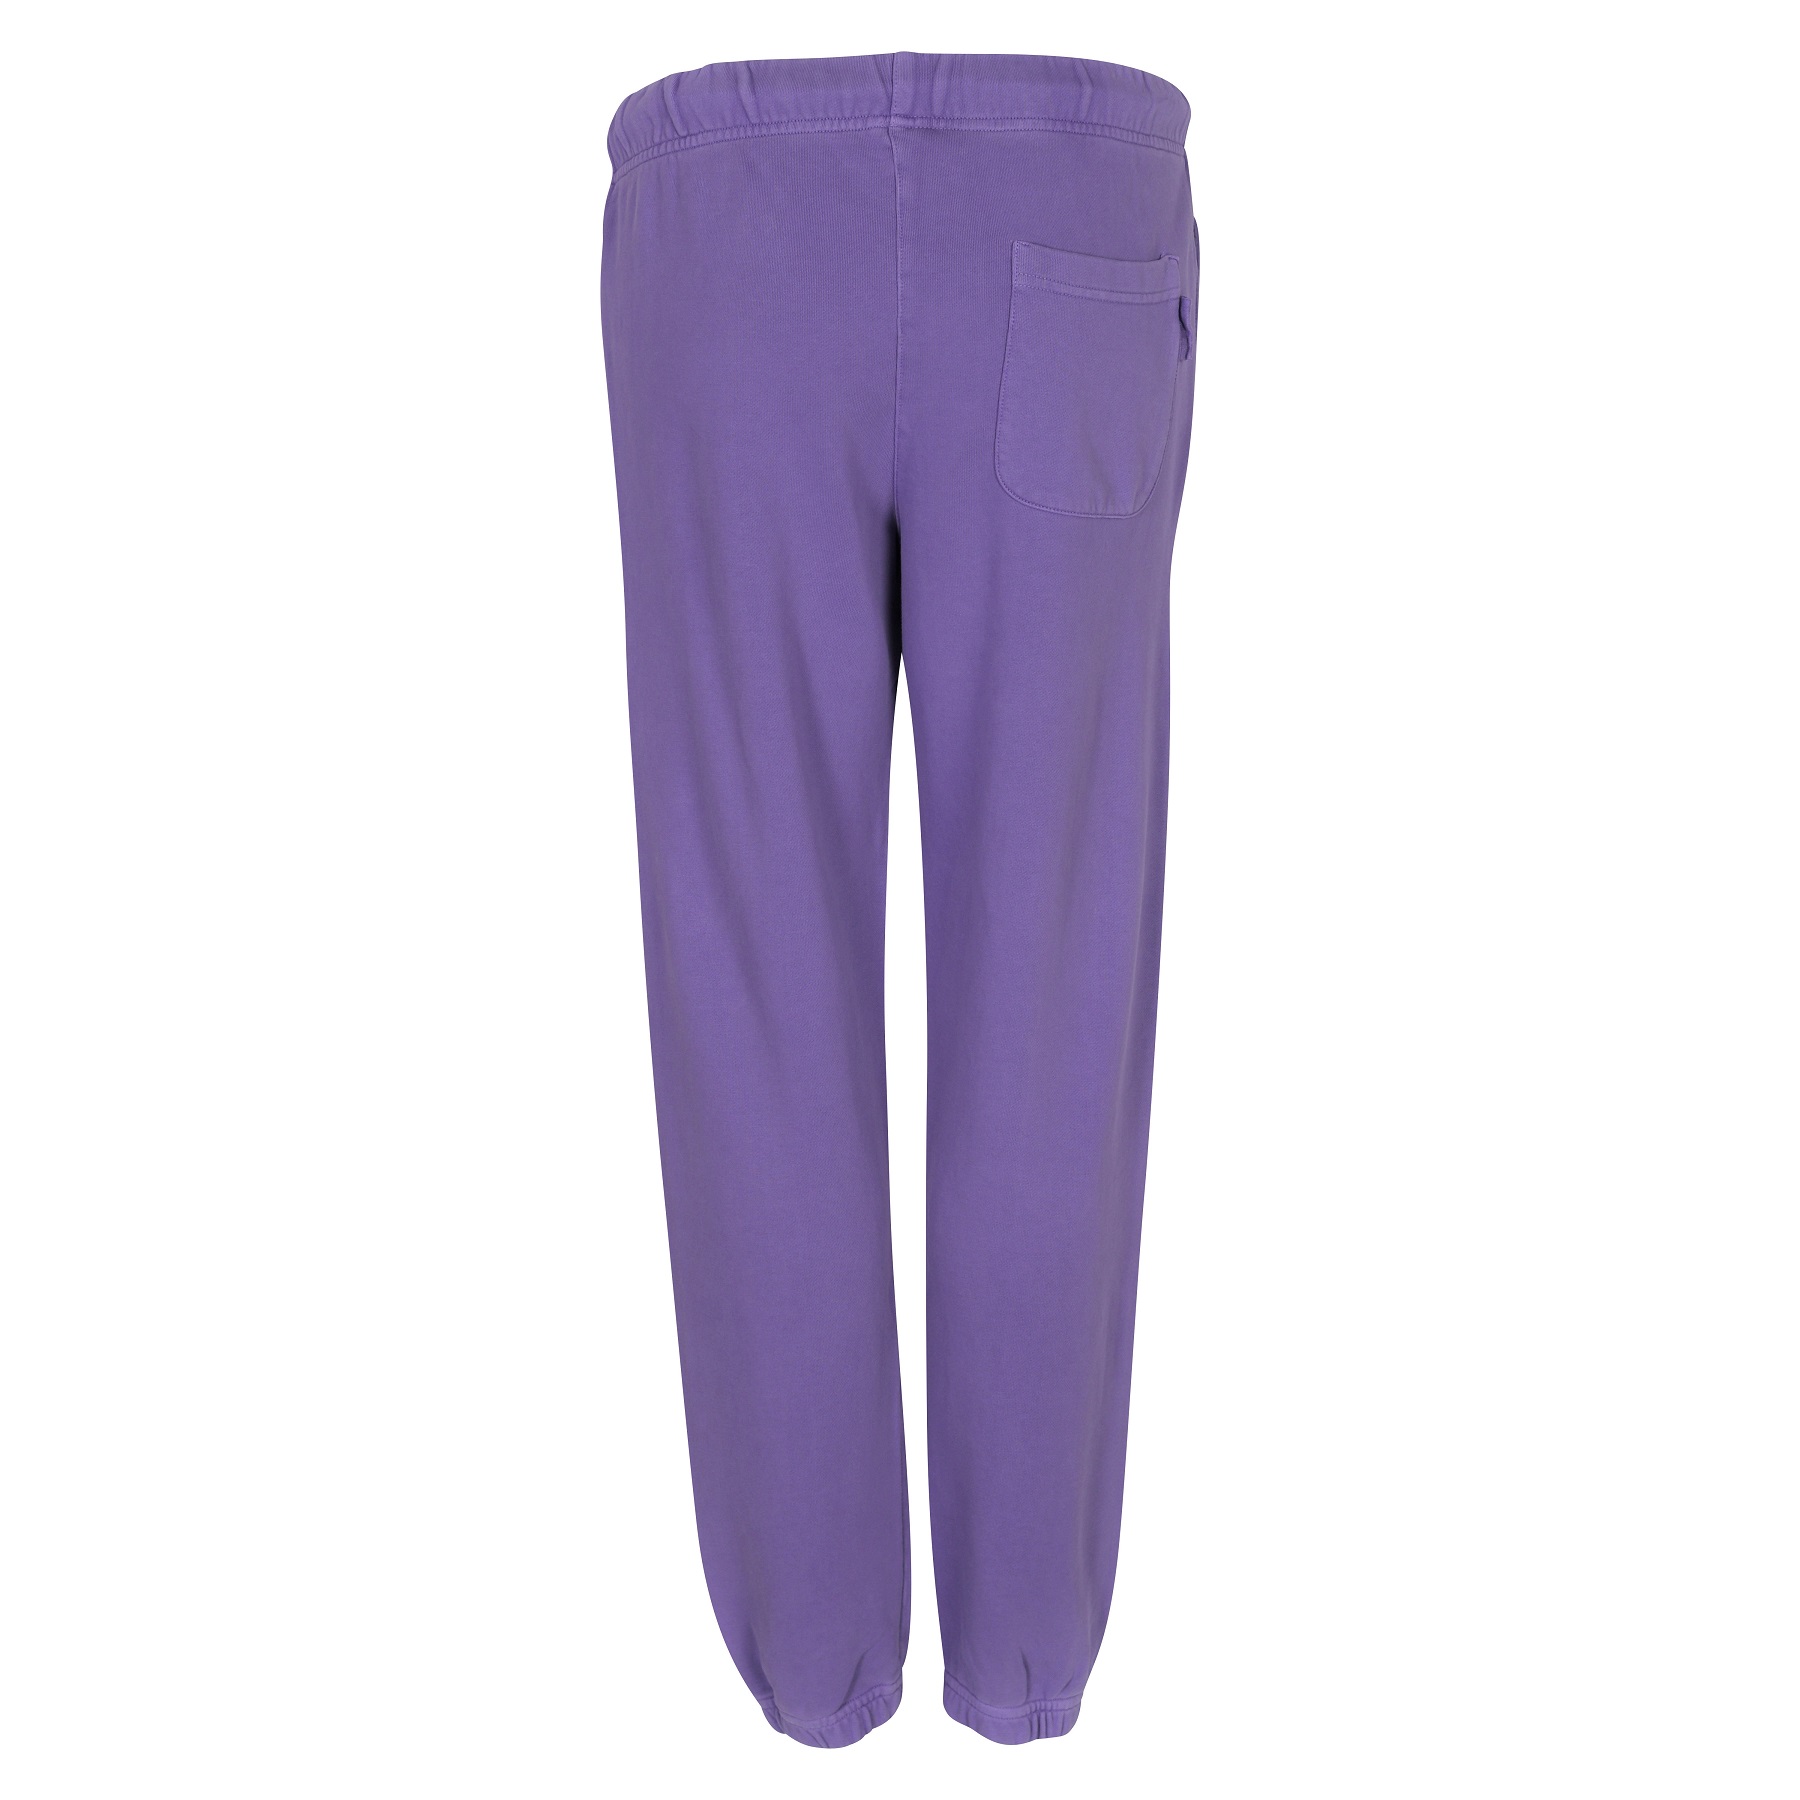 Autry Action Shoes Sweatpant Supervintage in Tinto Lilac XS